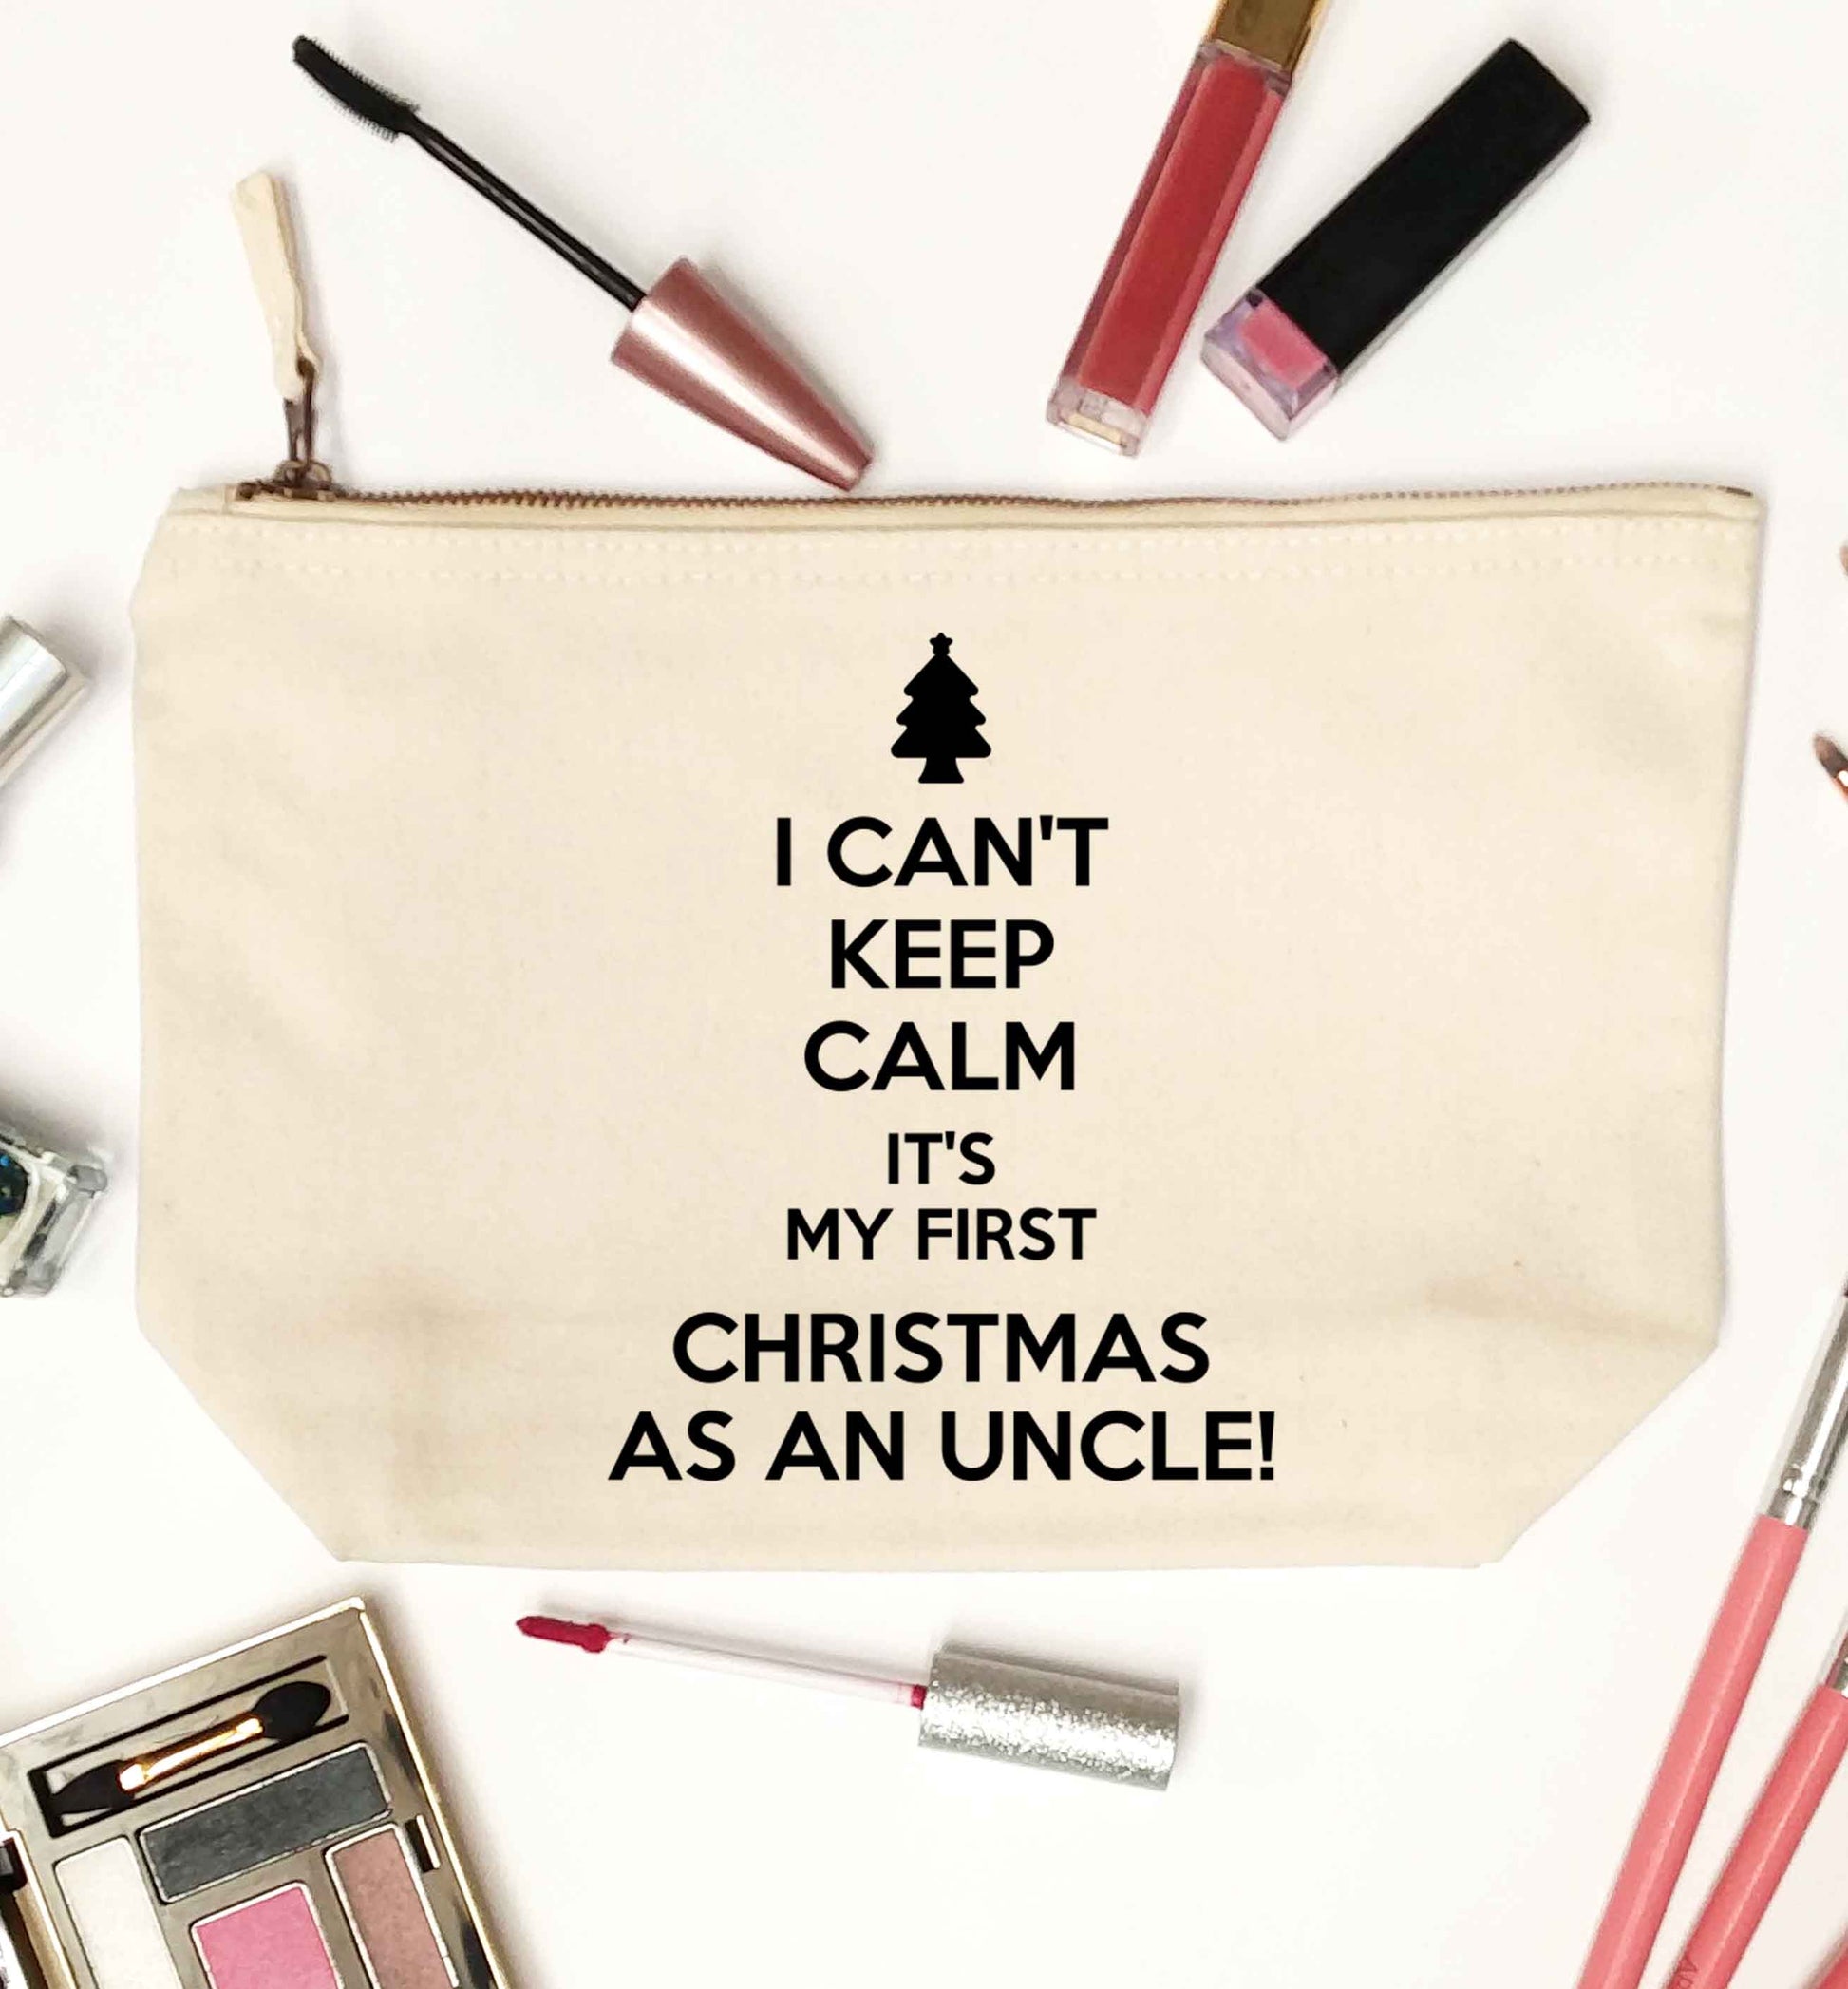 I can't keep calm it's my first Christmas as an uncle! natural makeup bag